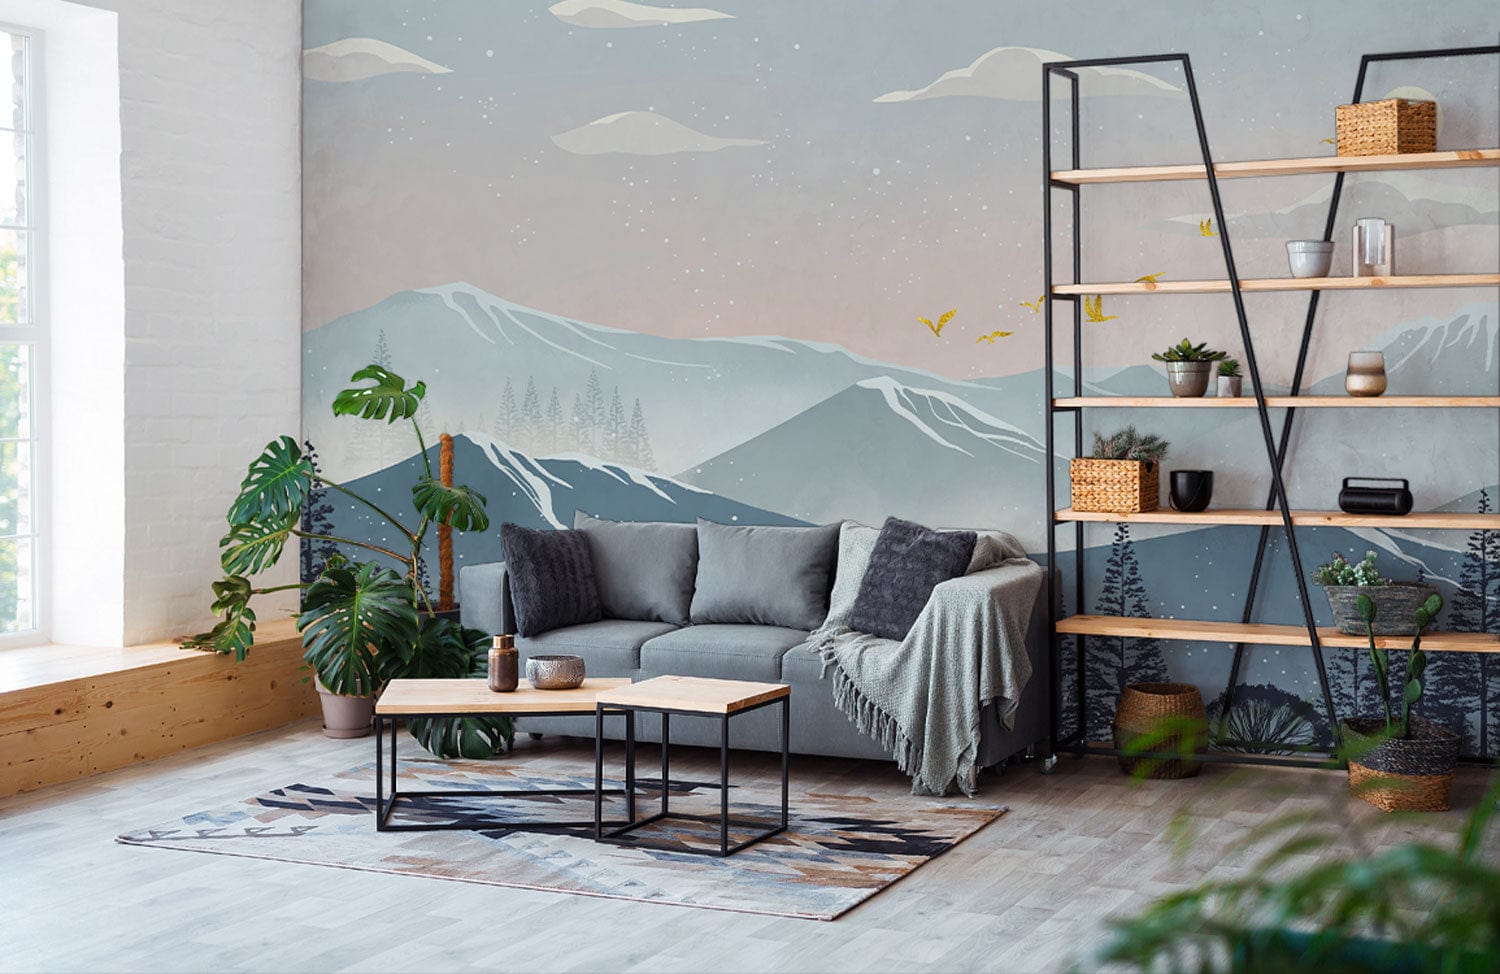 Wallpaper mural with an ombre mountain scene for use in decorating a living room